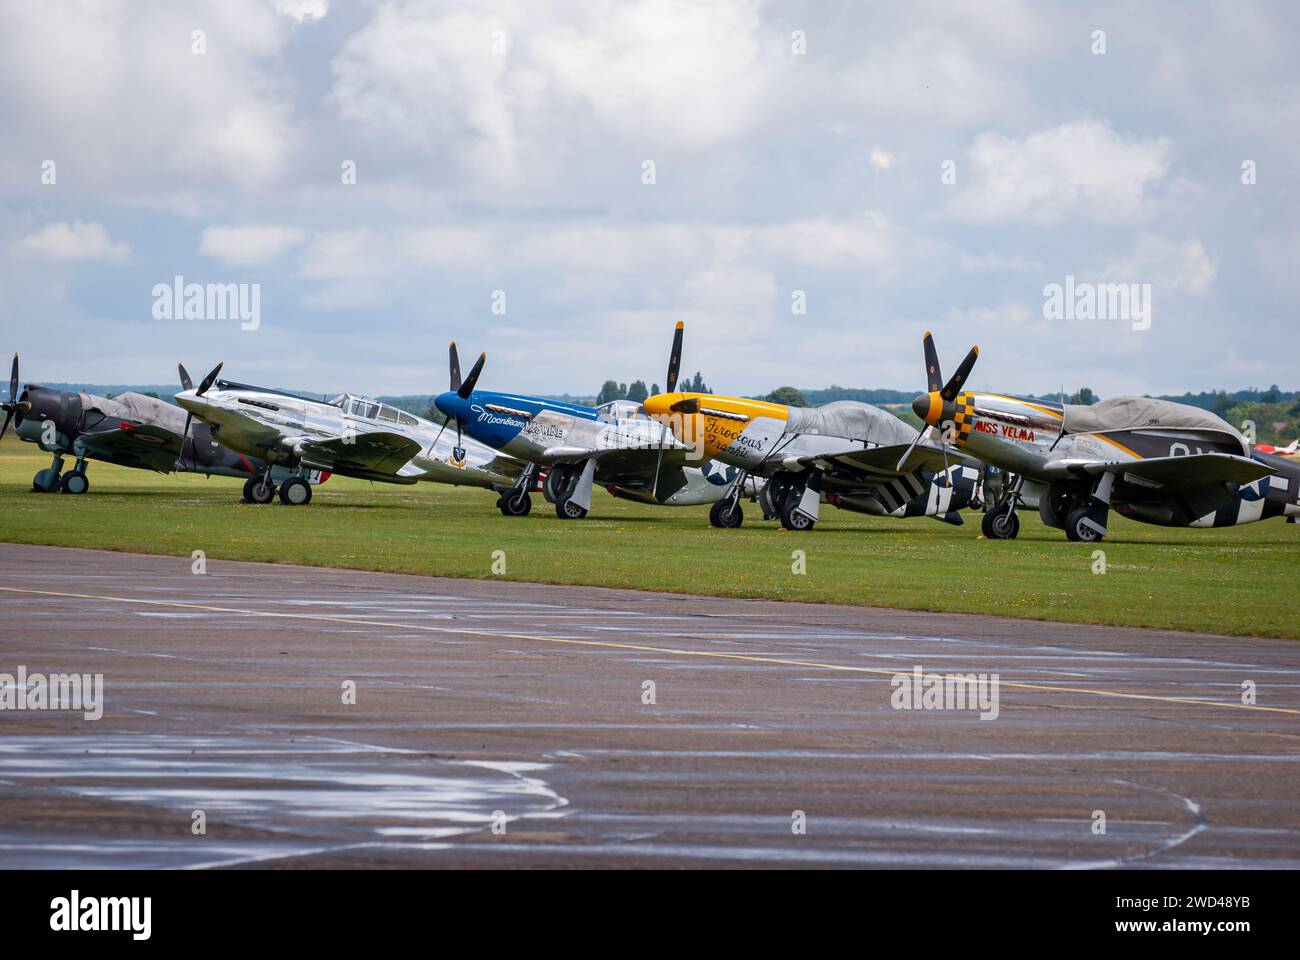 P51 Mustang fighter planes from WW2 USAF sat on an airfield Stock Photo